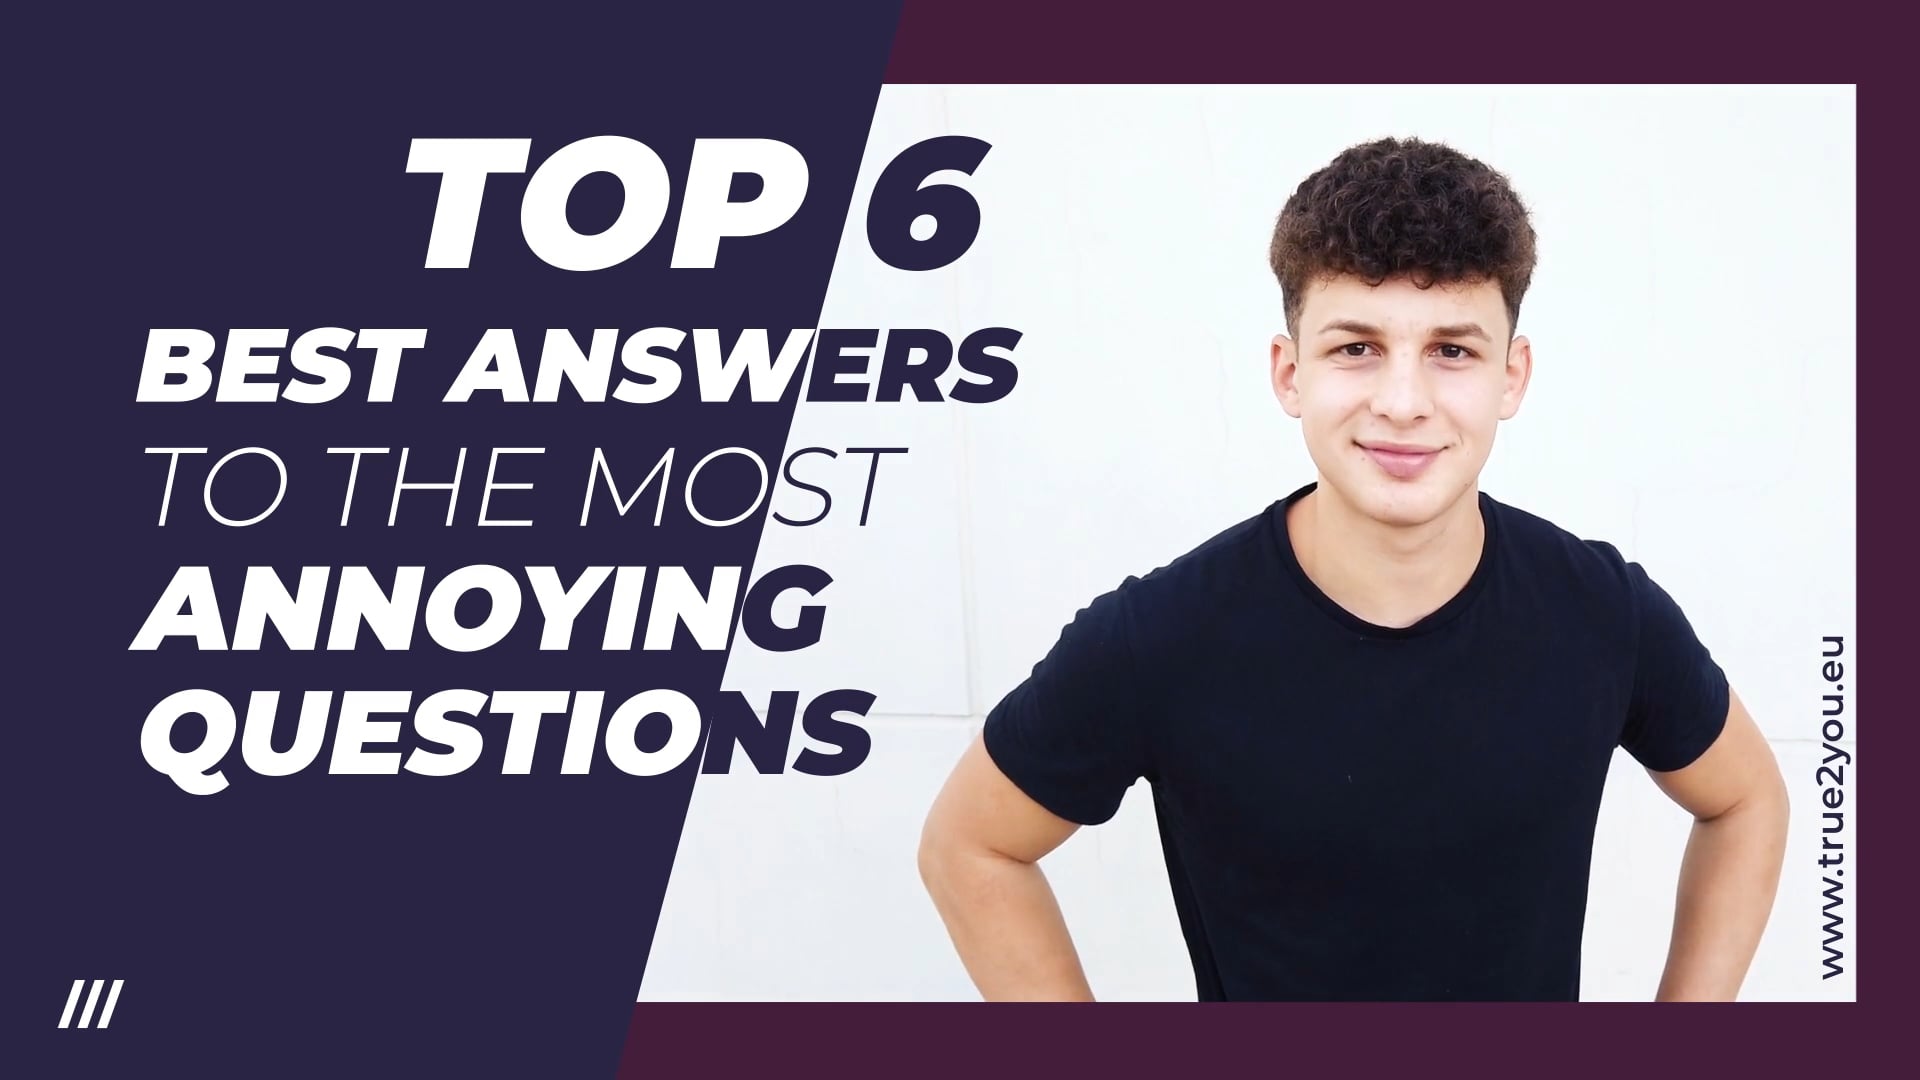 Top 6 - Best answers to the most annoying questions